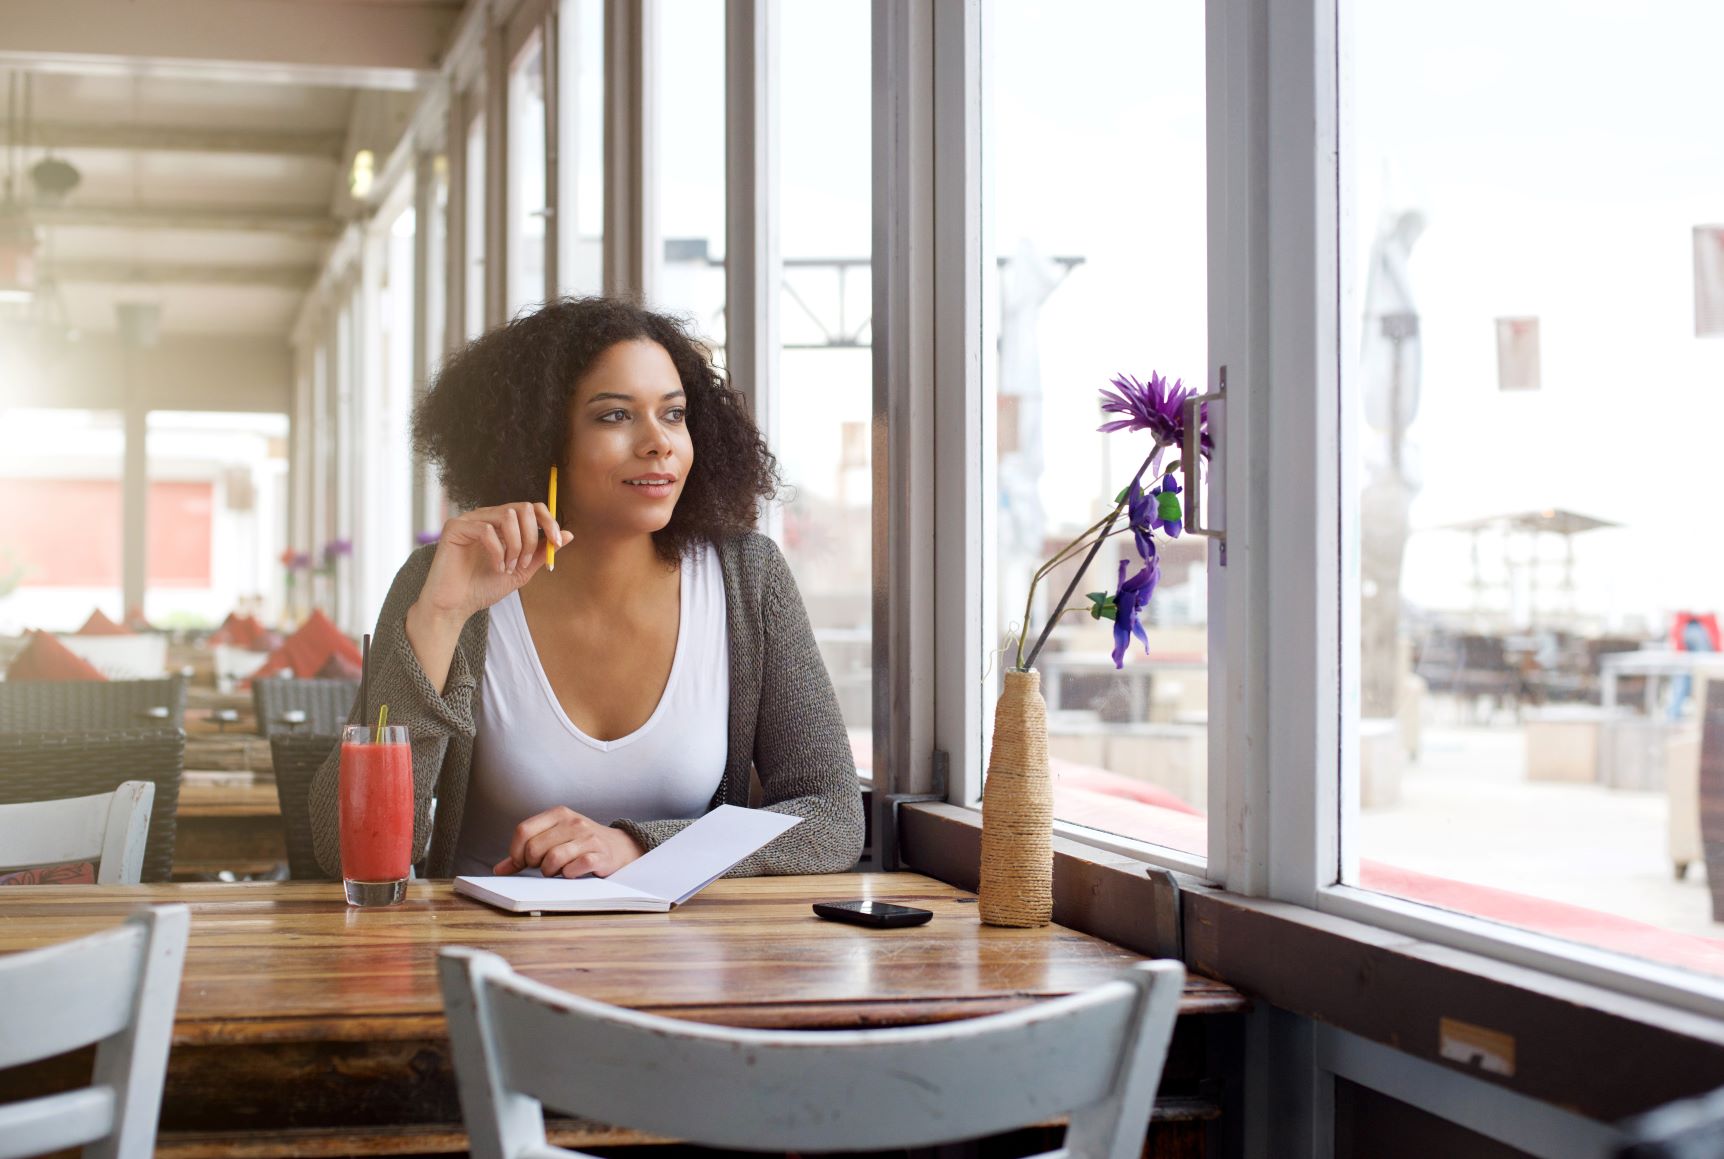 Black woman in white V-neck and grey cardigan at diner table writing and looking out window, manifestation for beginners, manifest your dream life